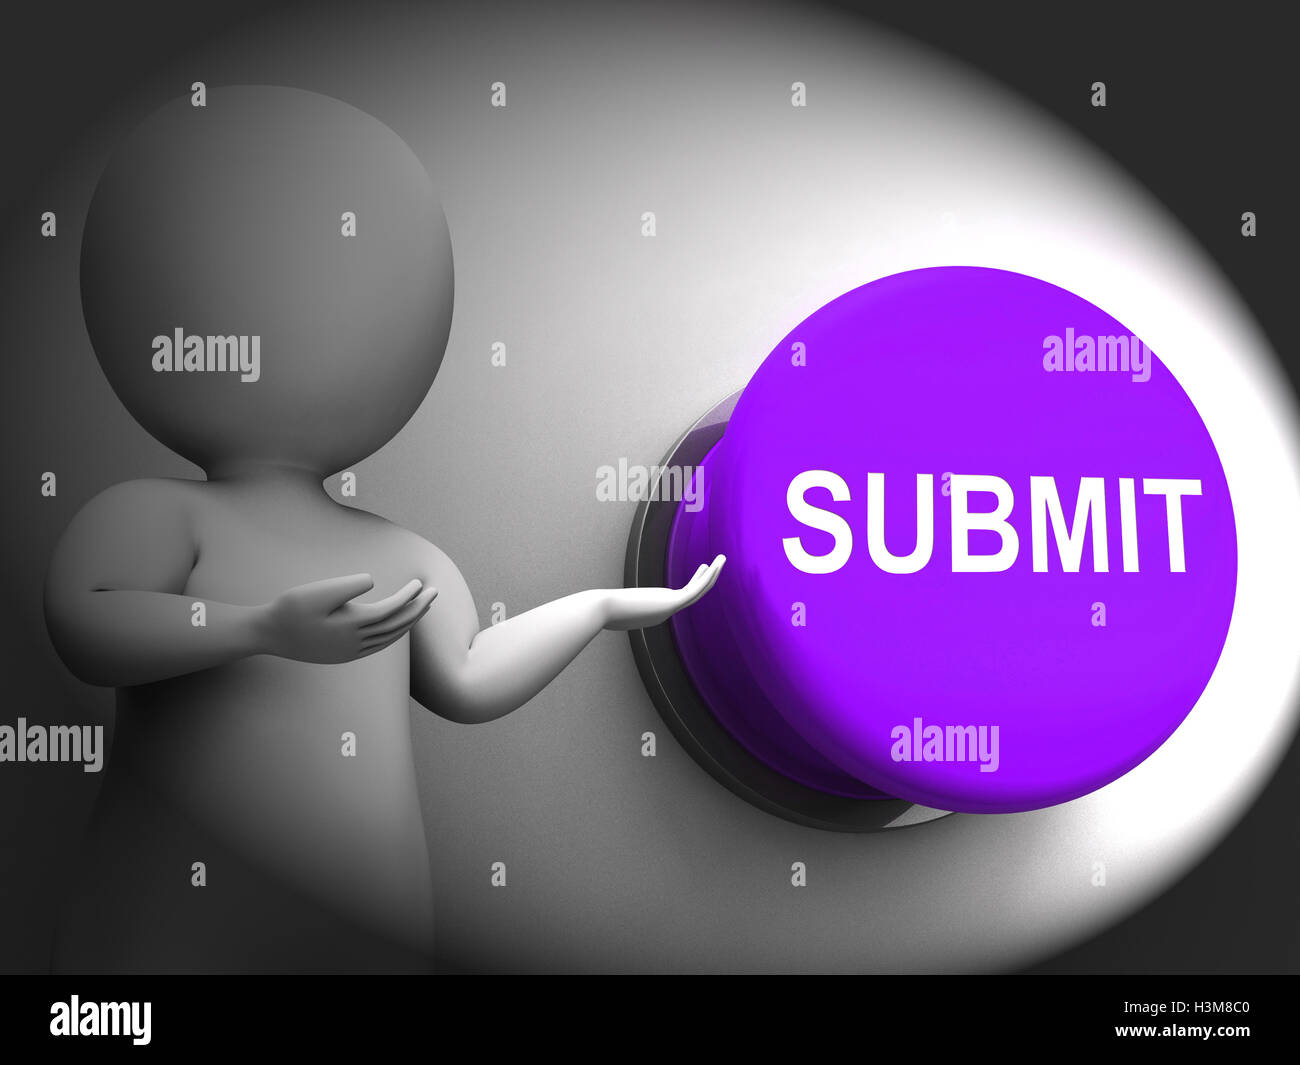 Submit Pressed Means Enter Application Or Document Stock Photo